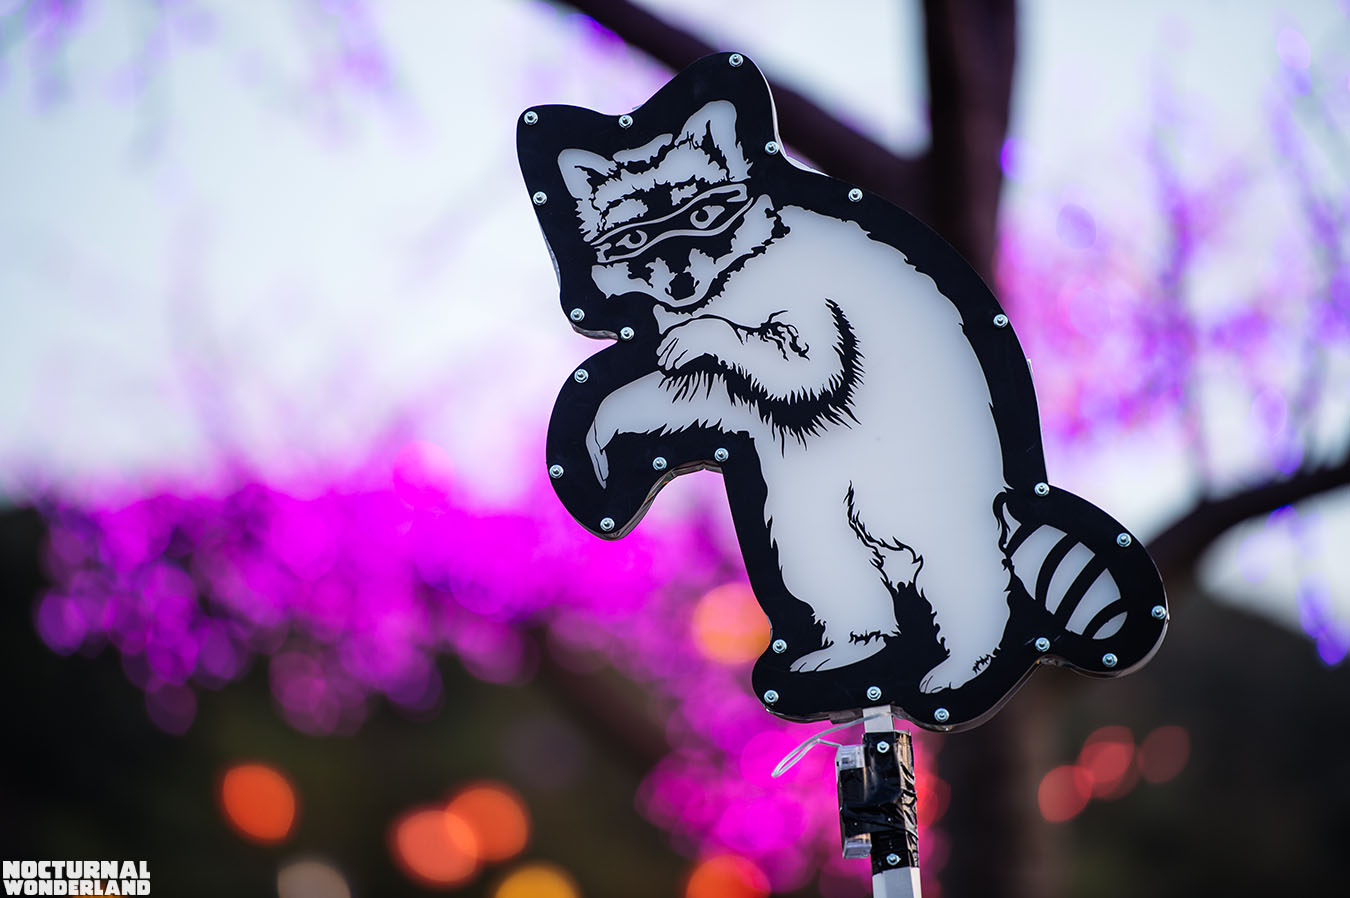 Peep These Awesome Nocturnal Wonderland 2017 Totems.